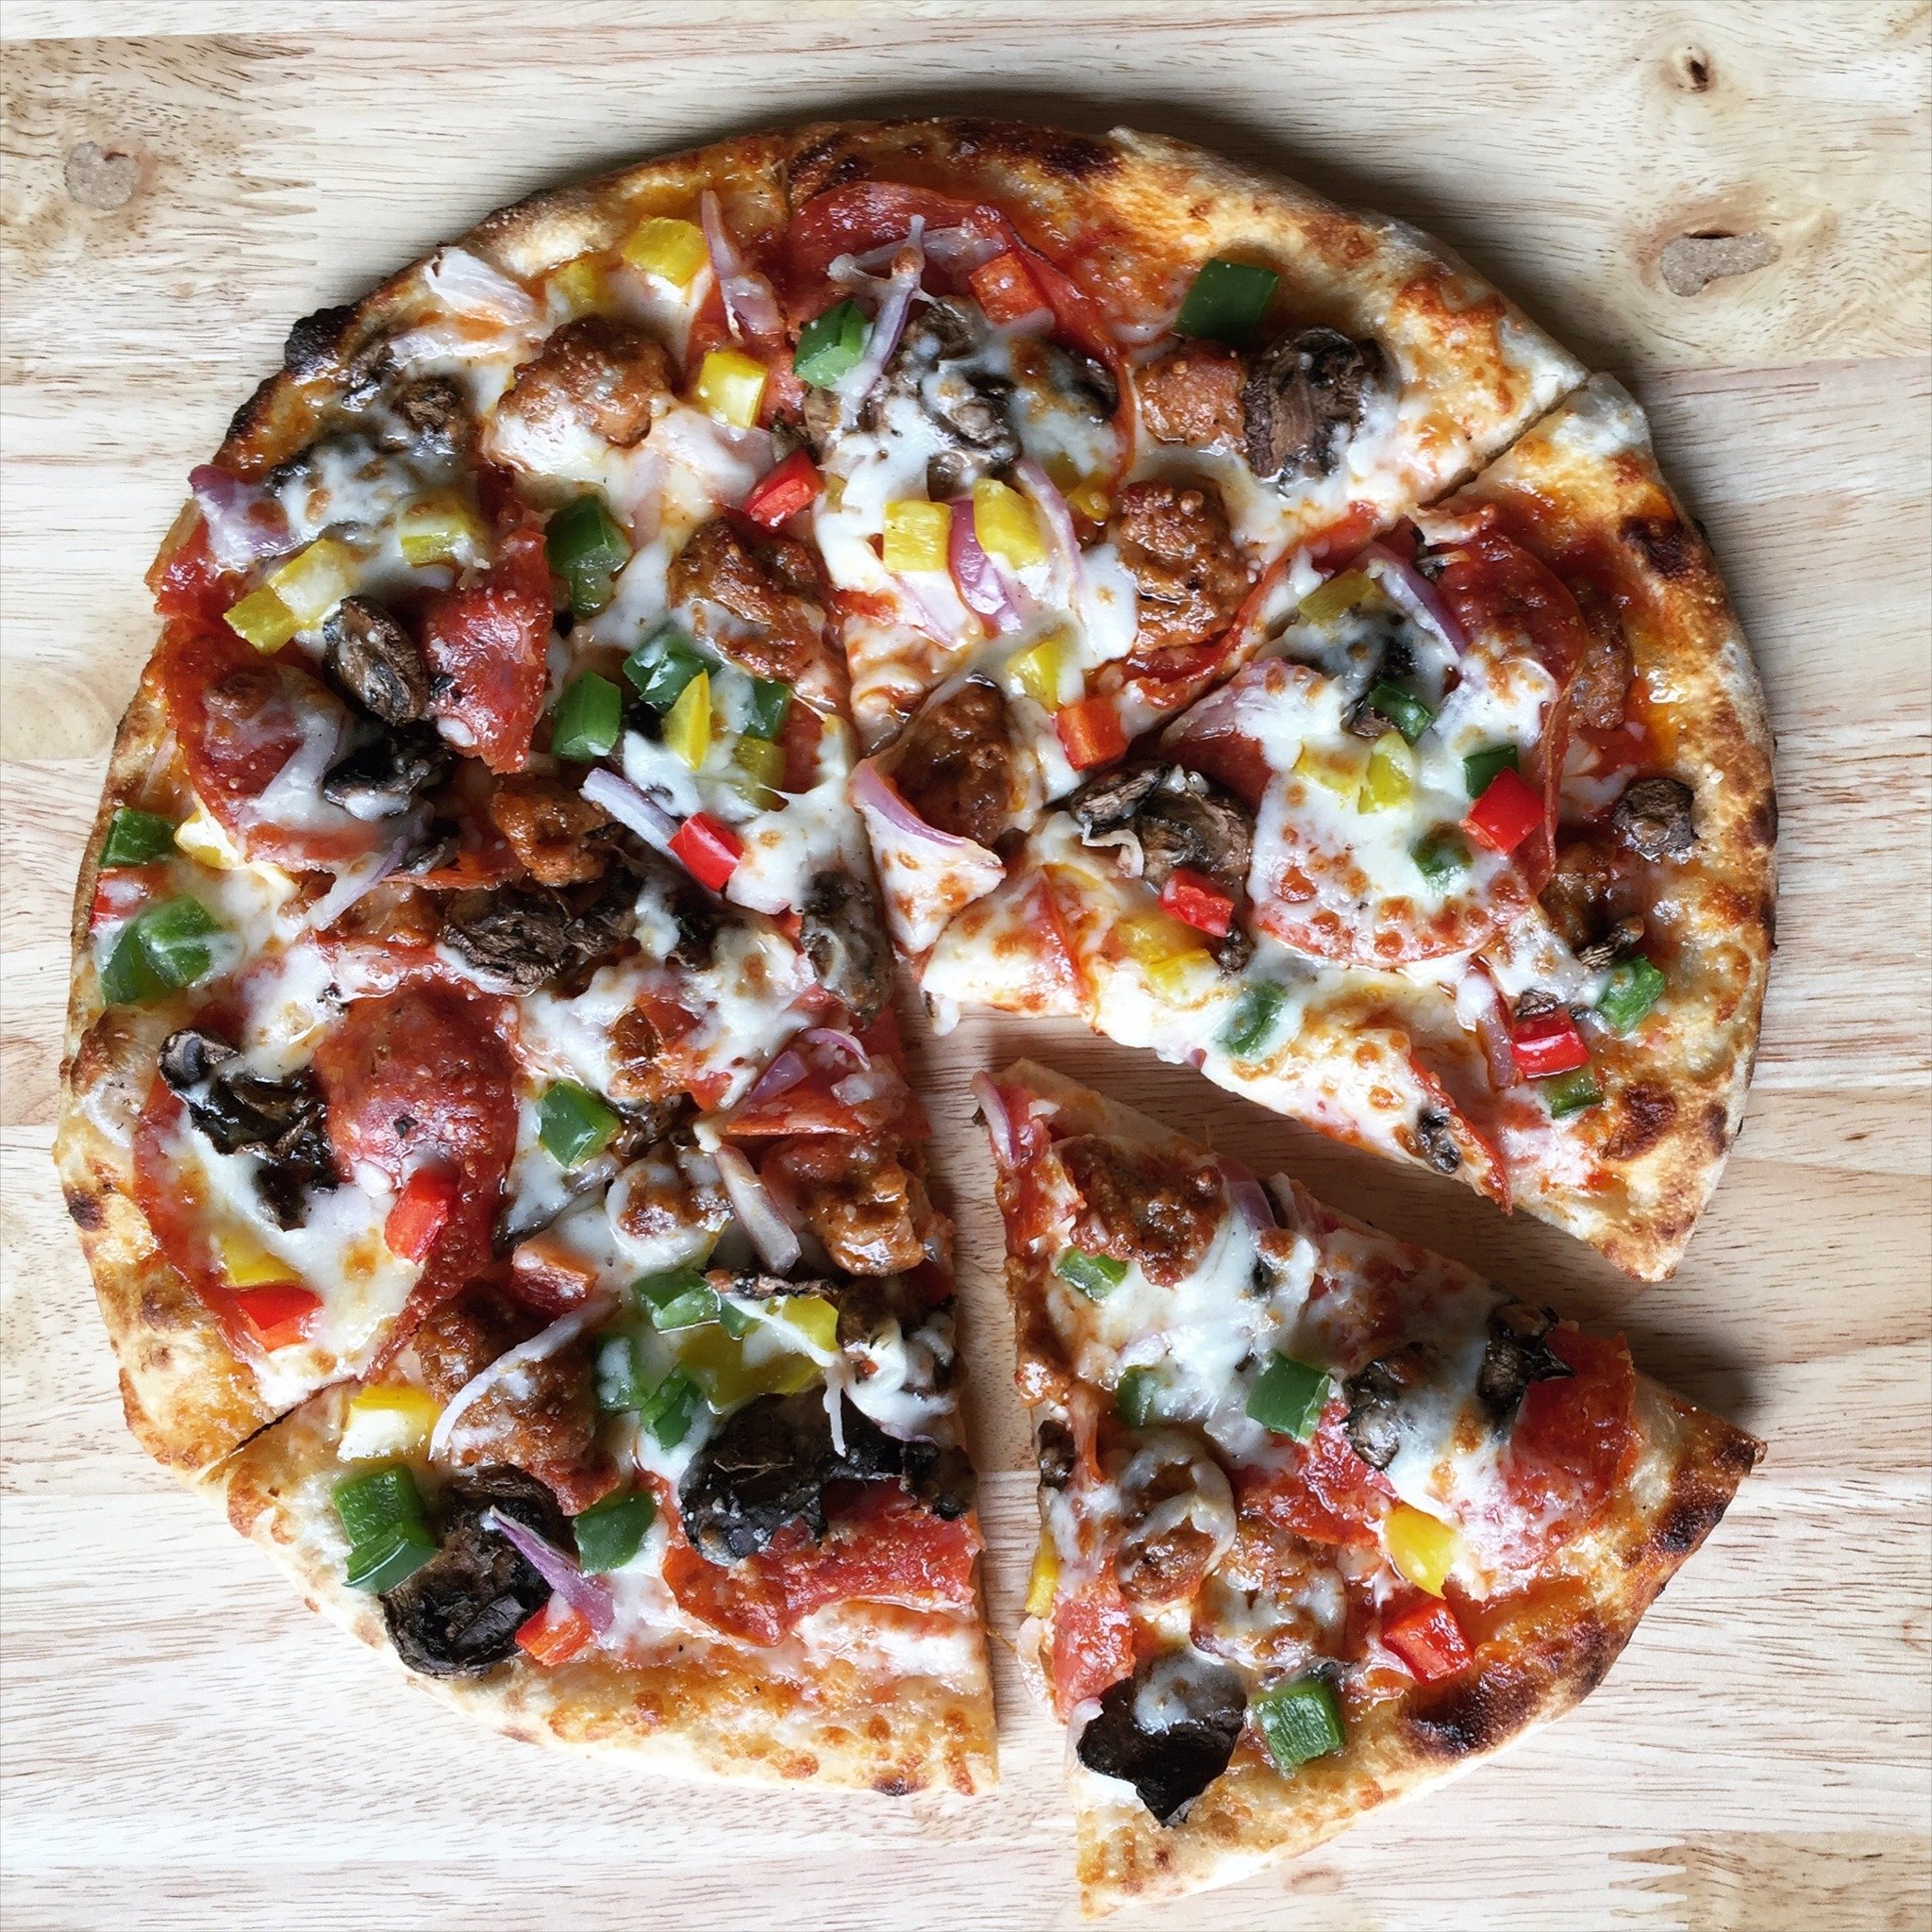 You can&rsquo;t go wrong with our works pizza, Stir It Up! #everythinpizza #pizzawiththeworks